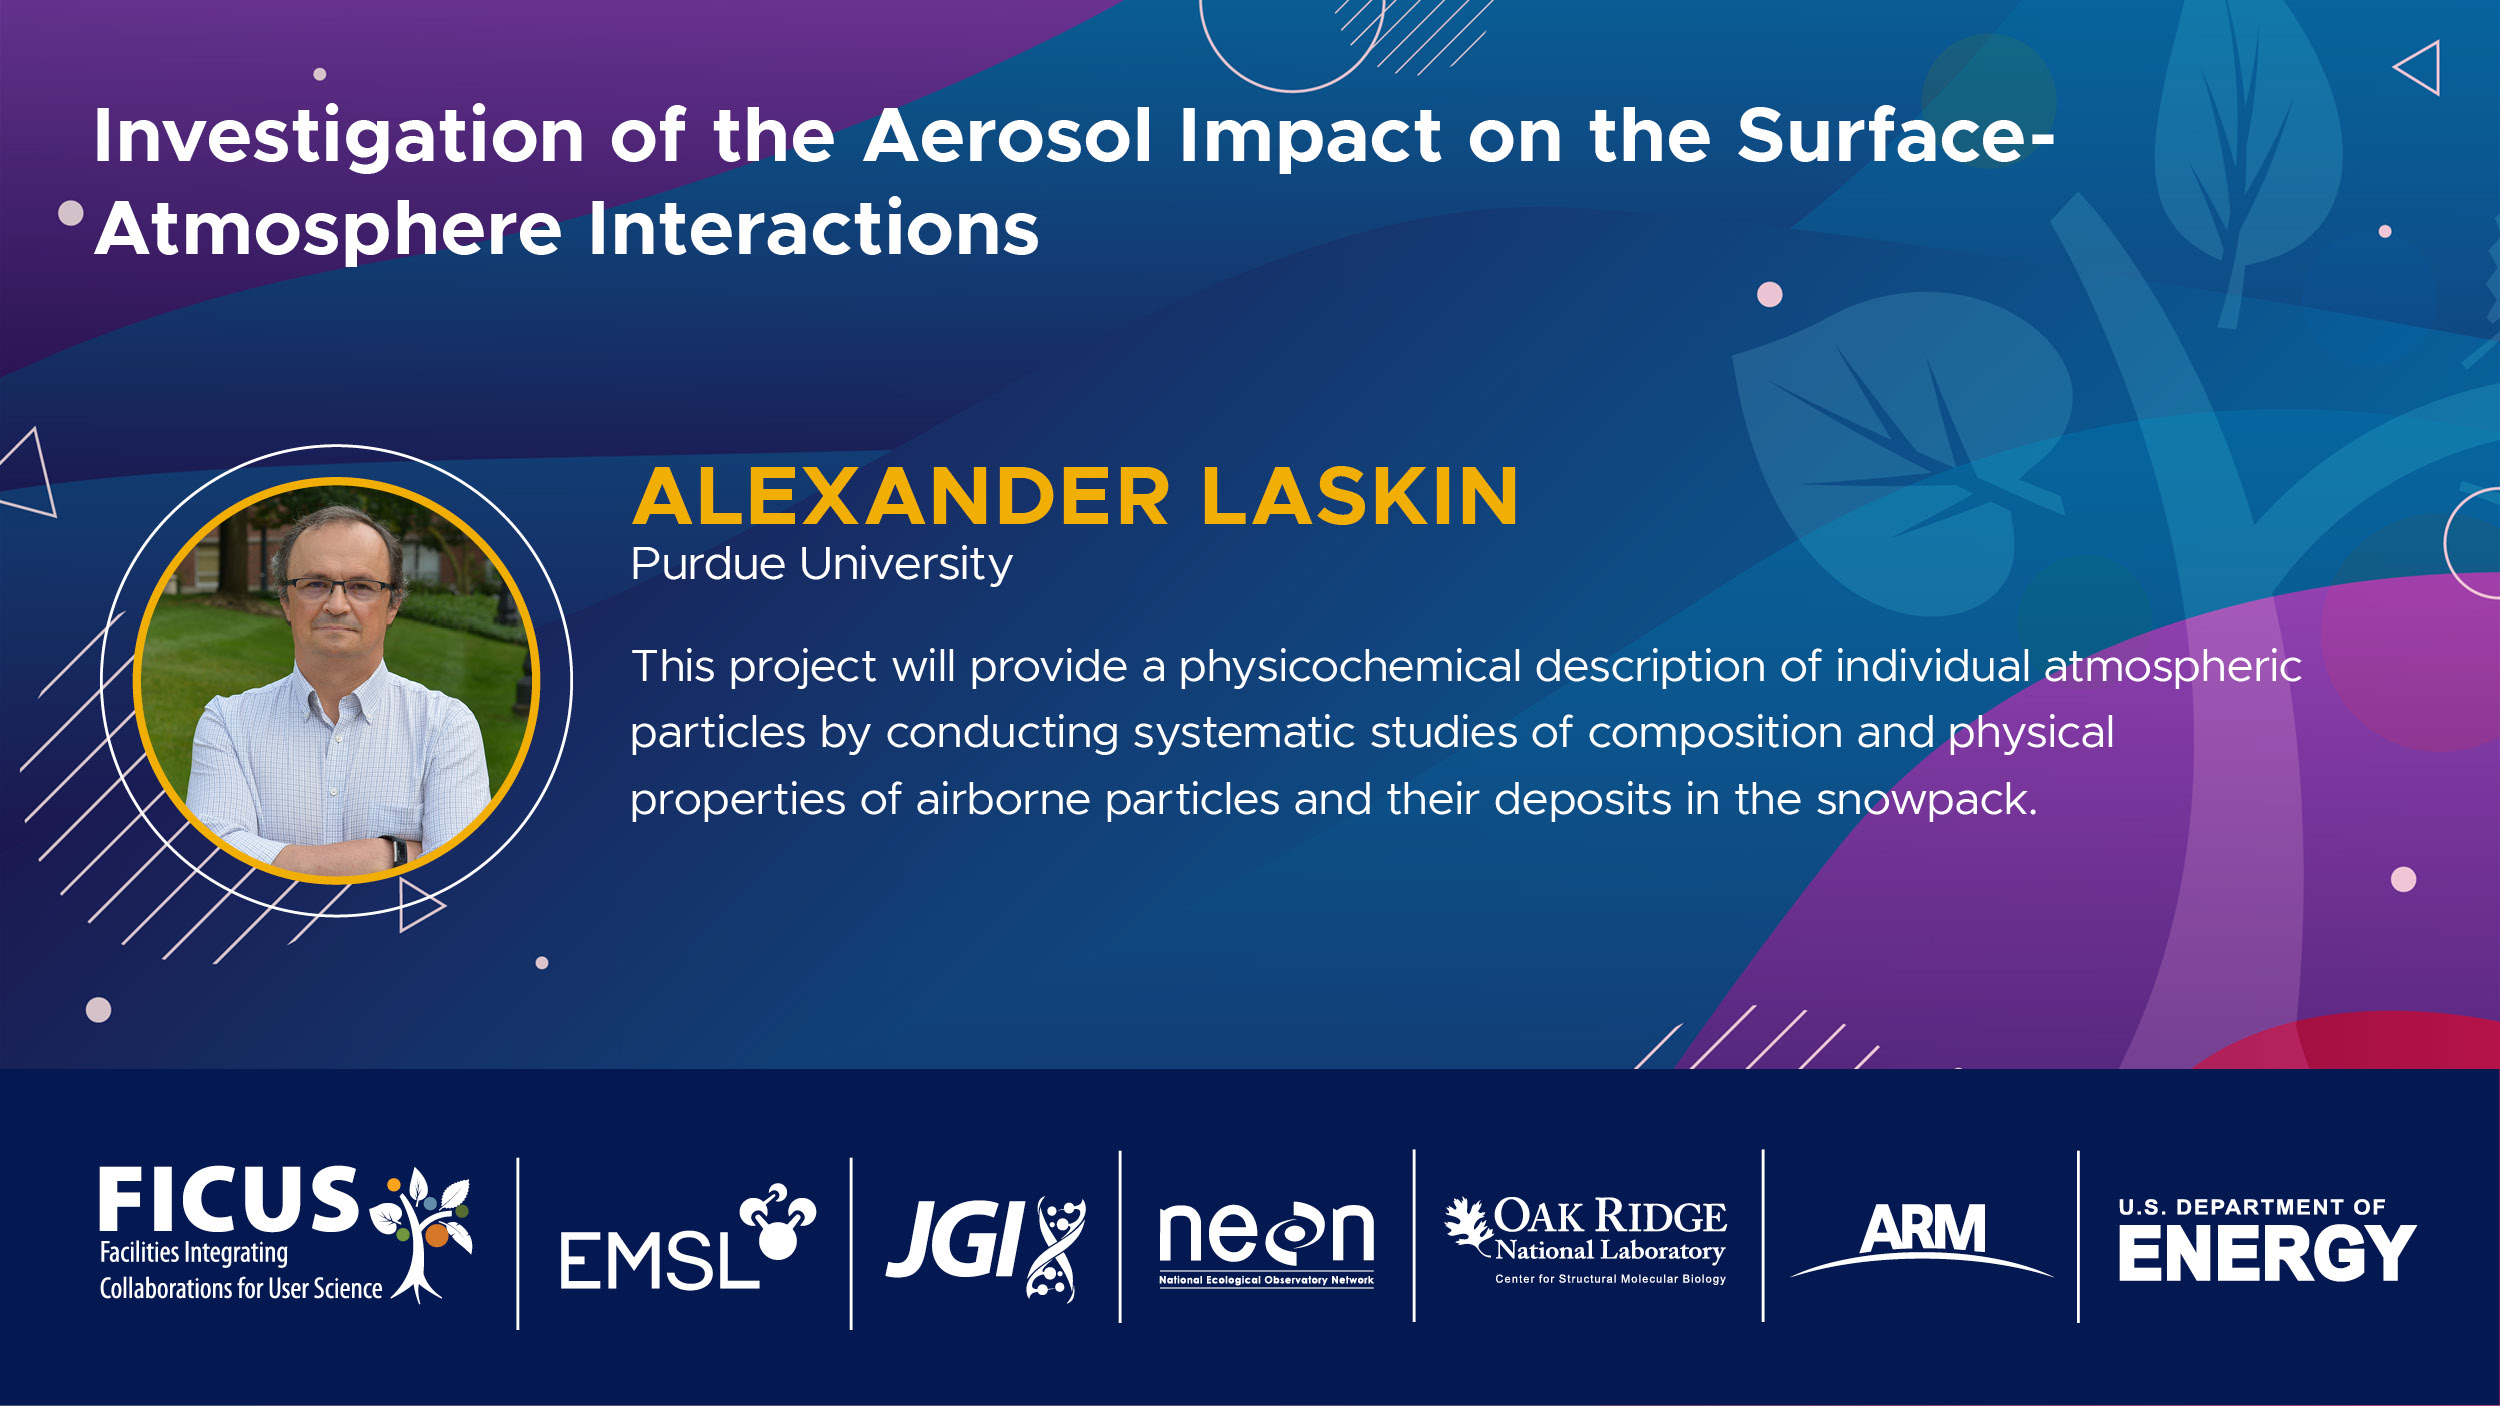 This card introduces Alexander Laskin's FICUS project, "Investigation of the Aerosol Impact on the Surface-Atmosphere Interactions."